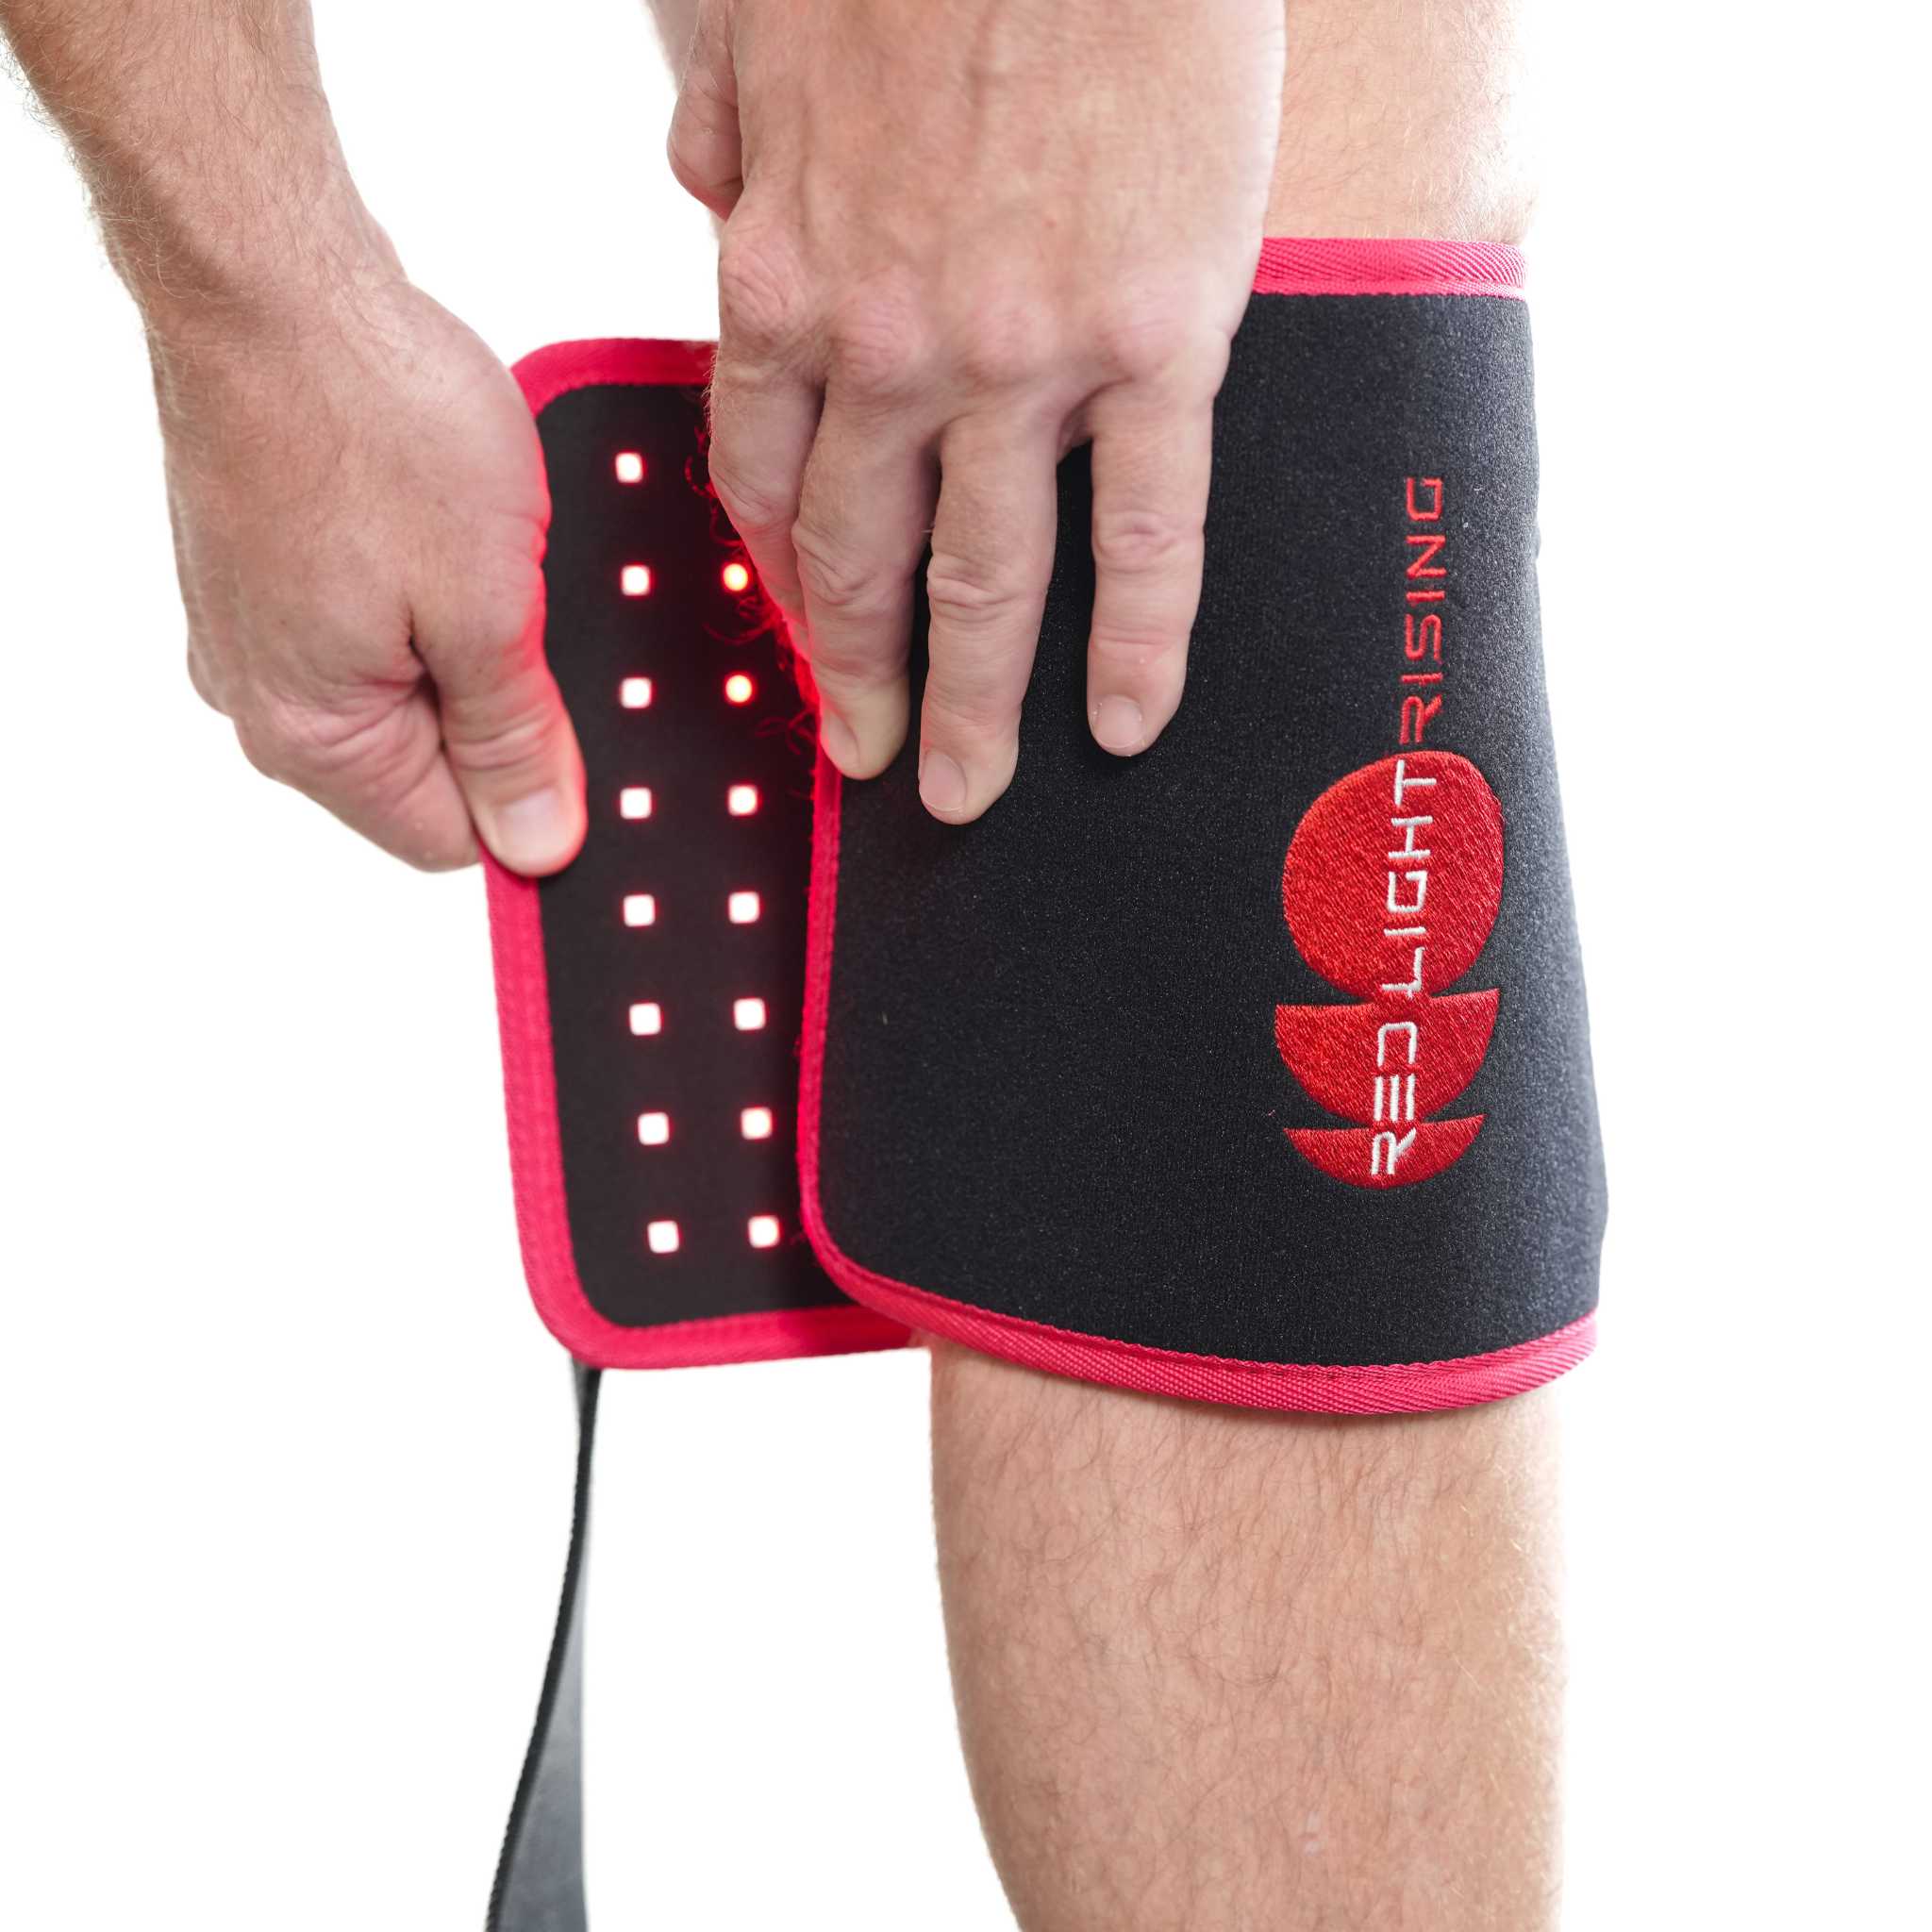 Product image Flexible red light therapy pad for knee pain wrapping around the knee